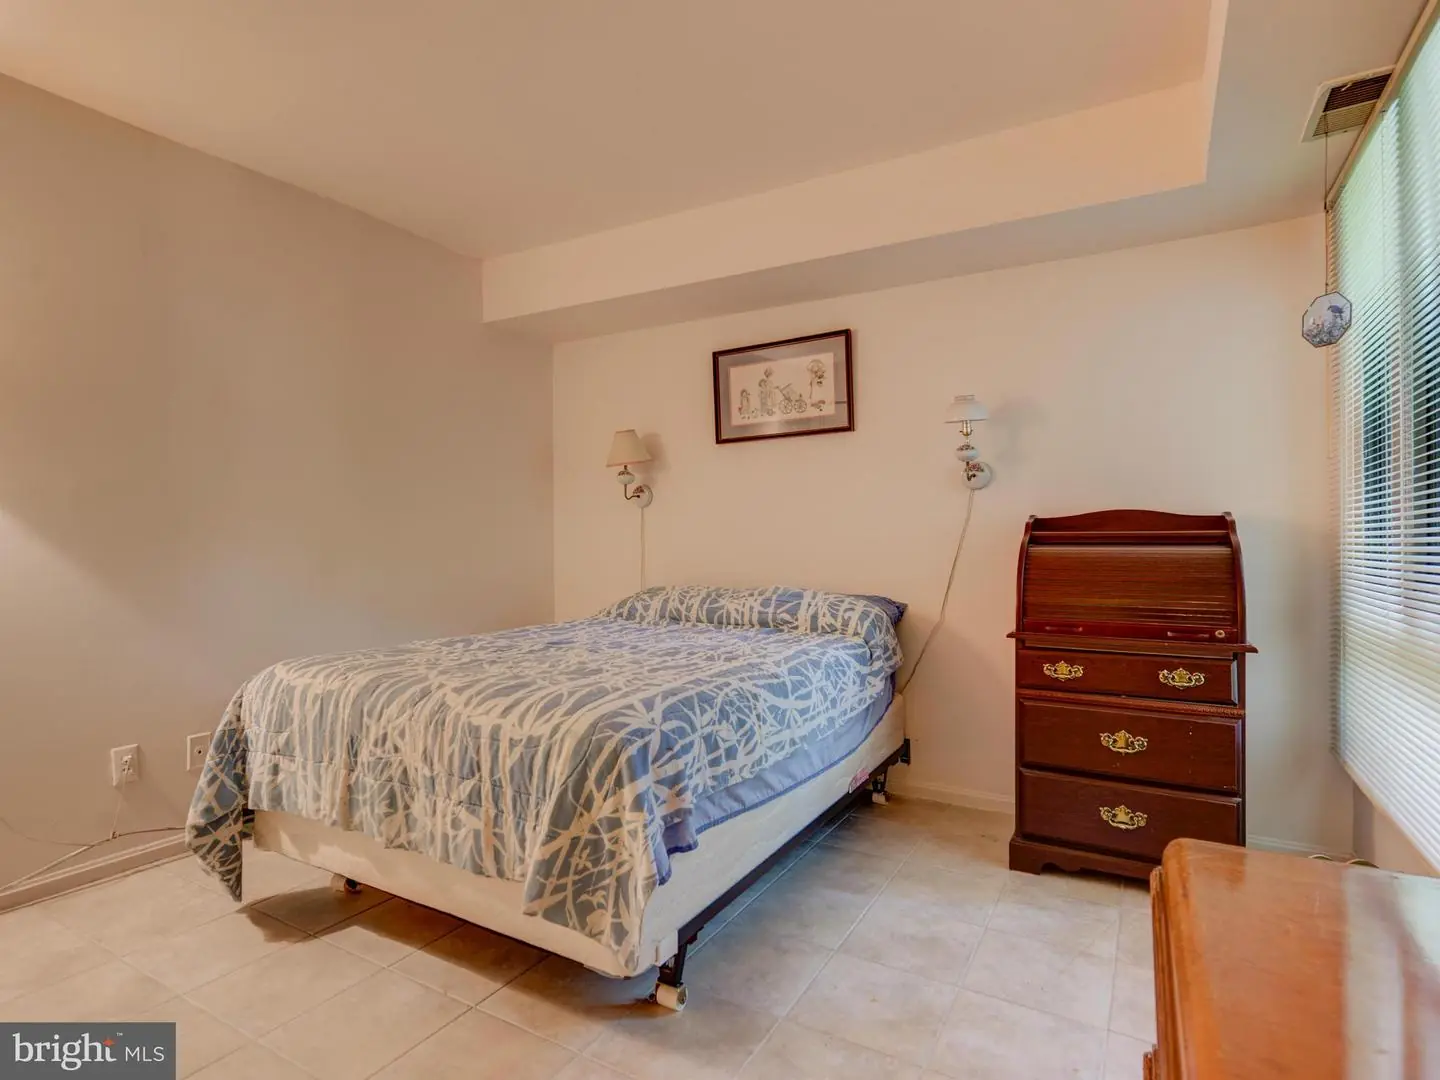 1003220072-300850415716-2021-09-07-14-23-57  |  Heritage Court | Annandale Delaware Real Estate For Sale | MLS# 1003220072  - Best of Northern Virginia